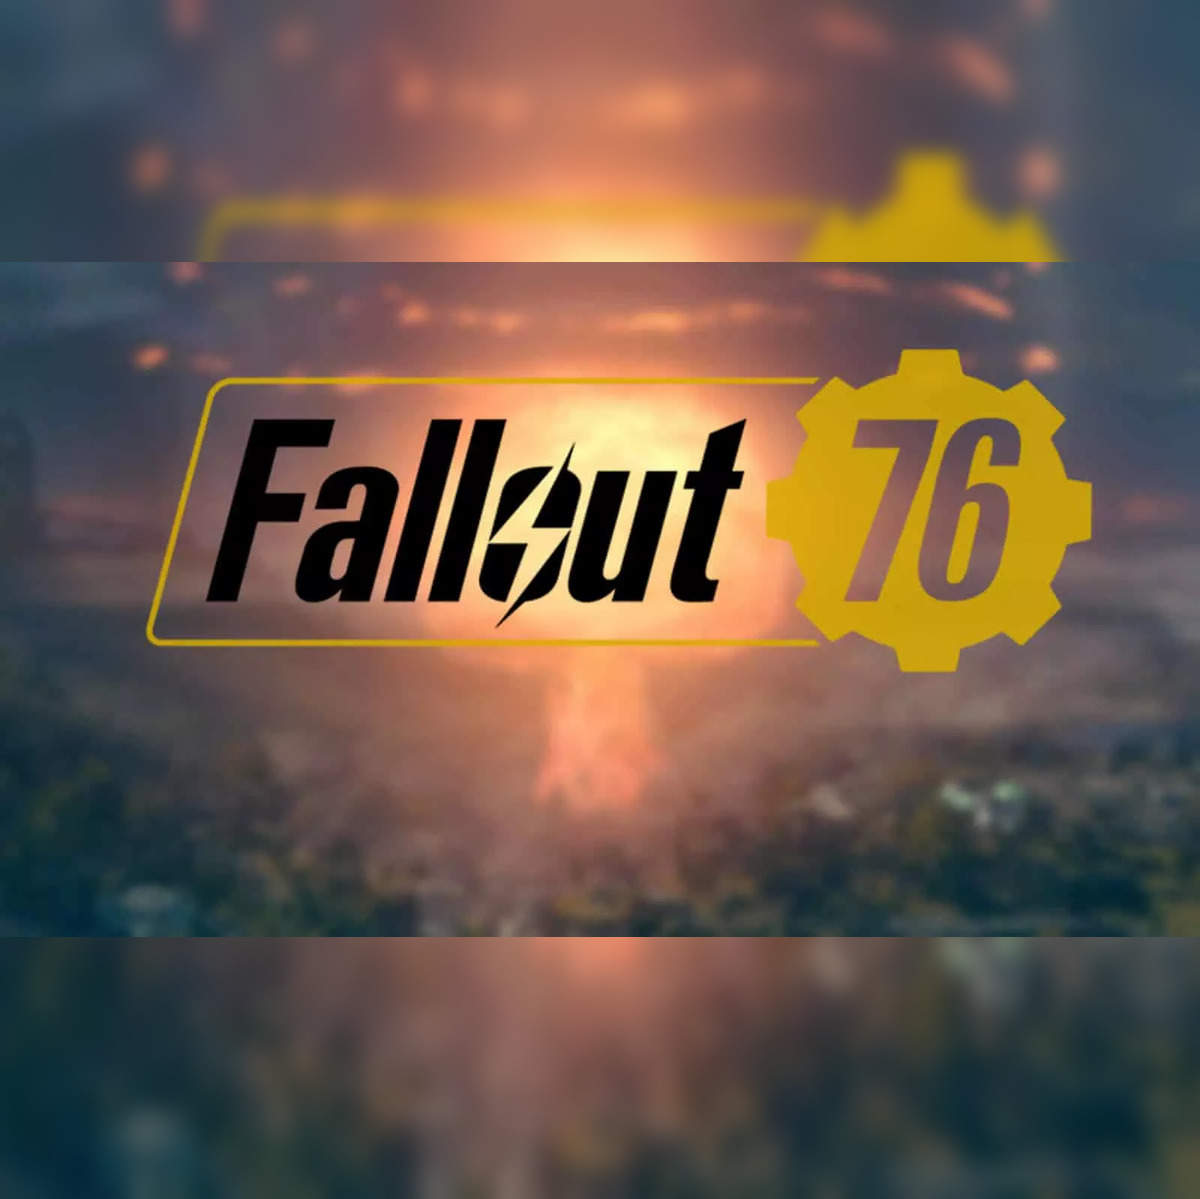 Fallout 76: Where to get screws